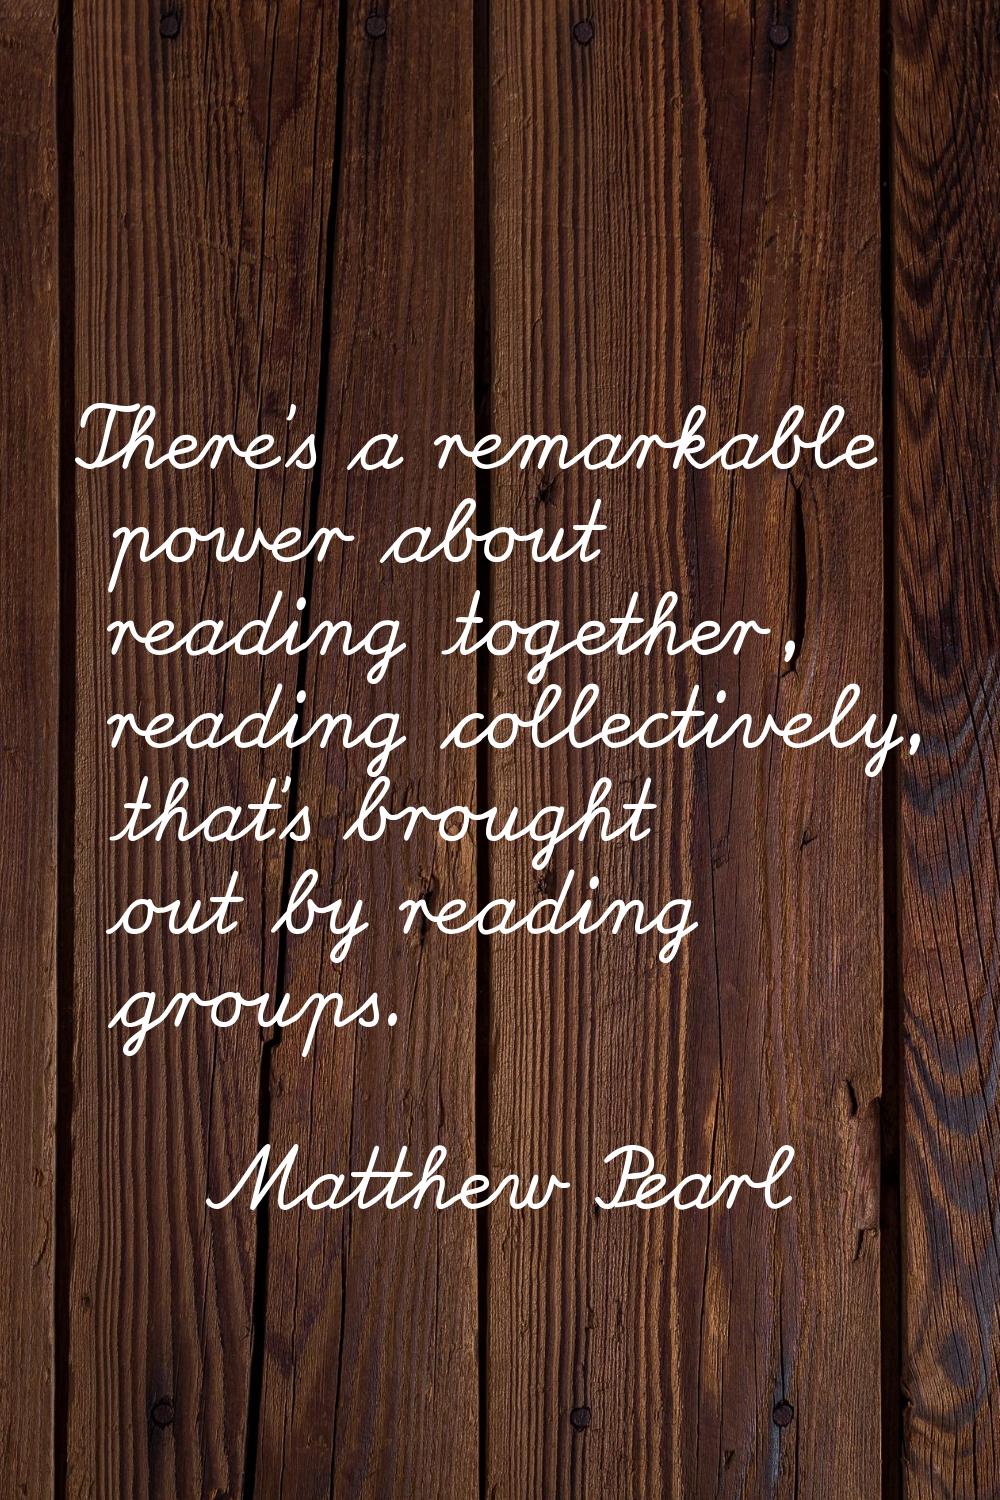 There's a remarkable power about reading together, reading collectively, that's brought out by read